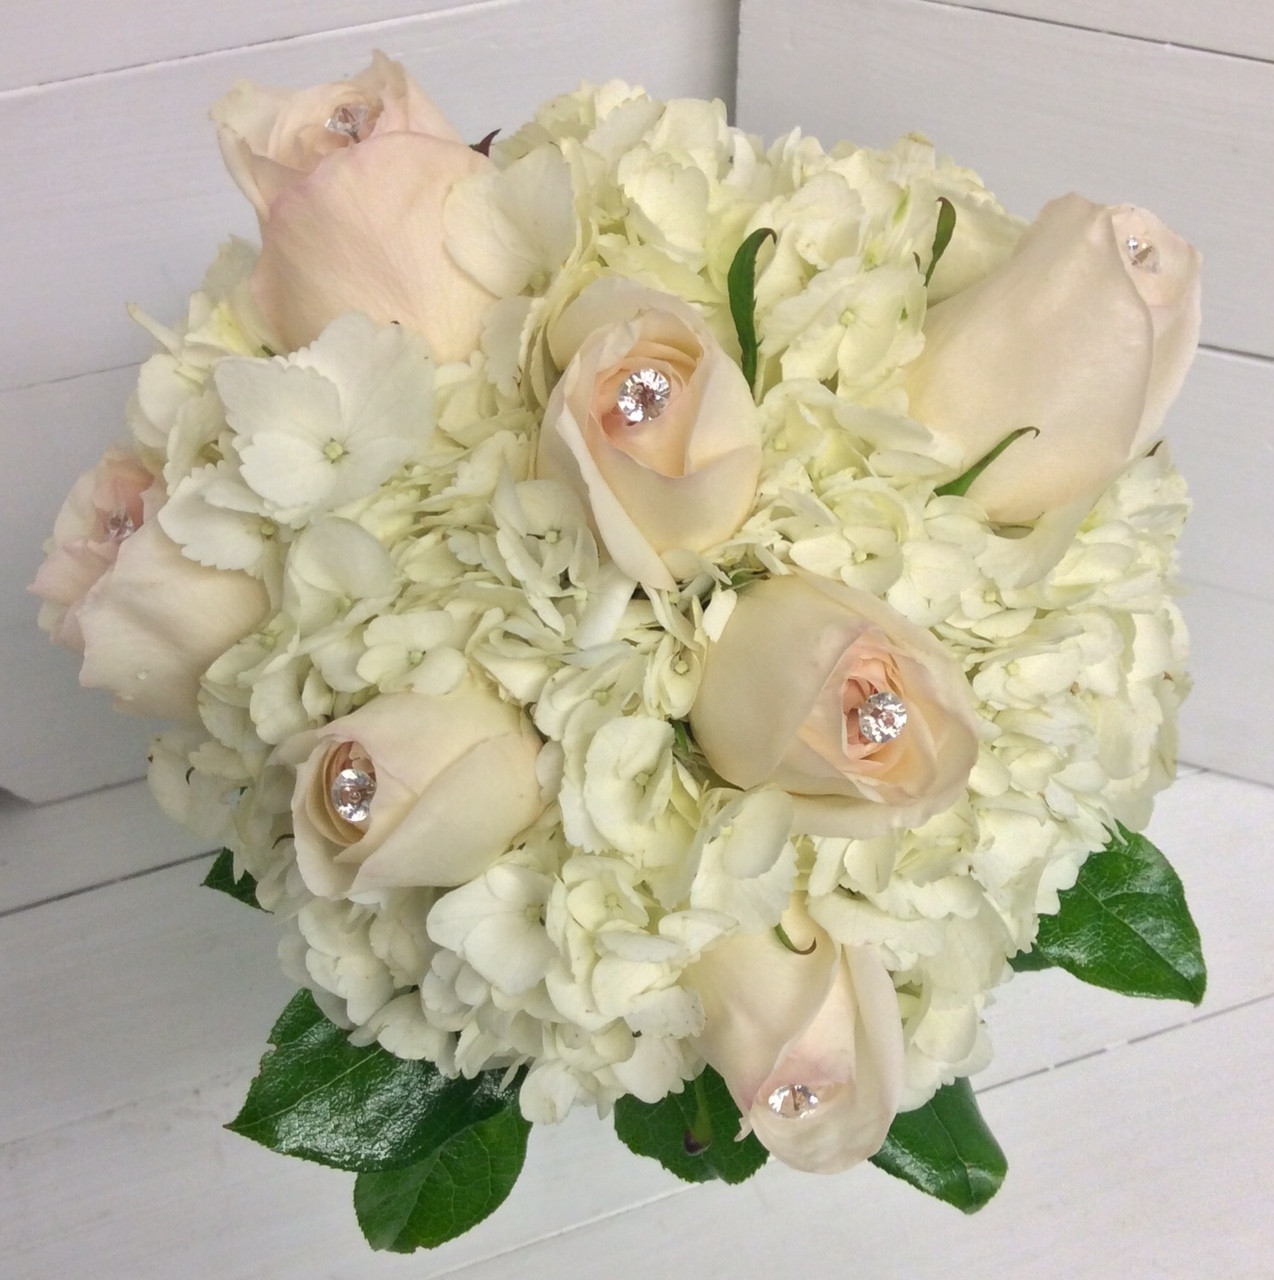 Premium Photo  Beautiful delicate pink flower bouquet of white roses and  eustoma in a beautiful package